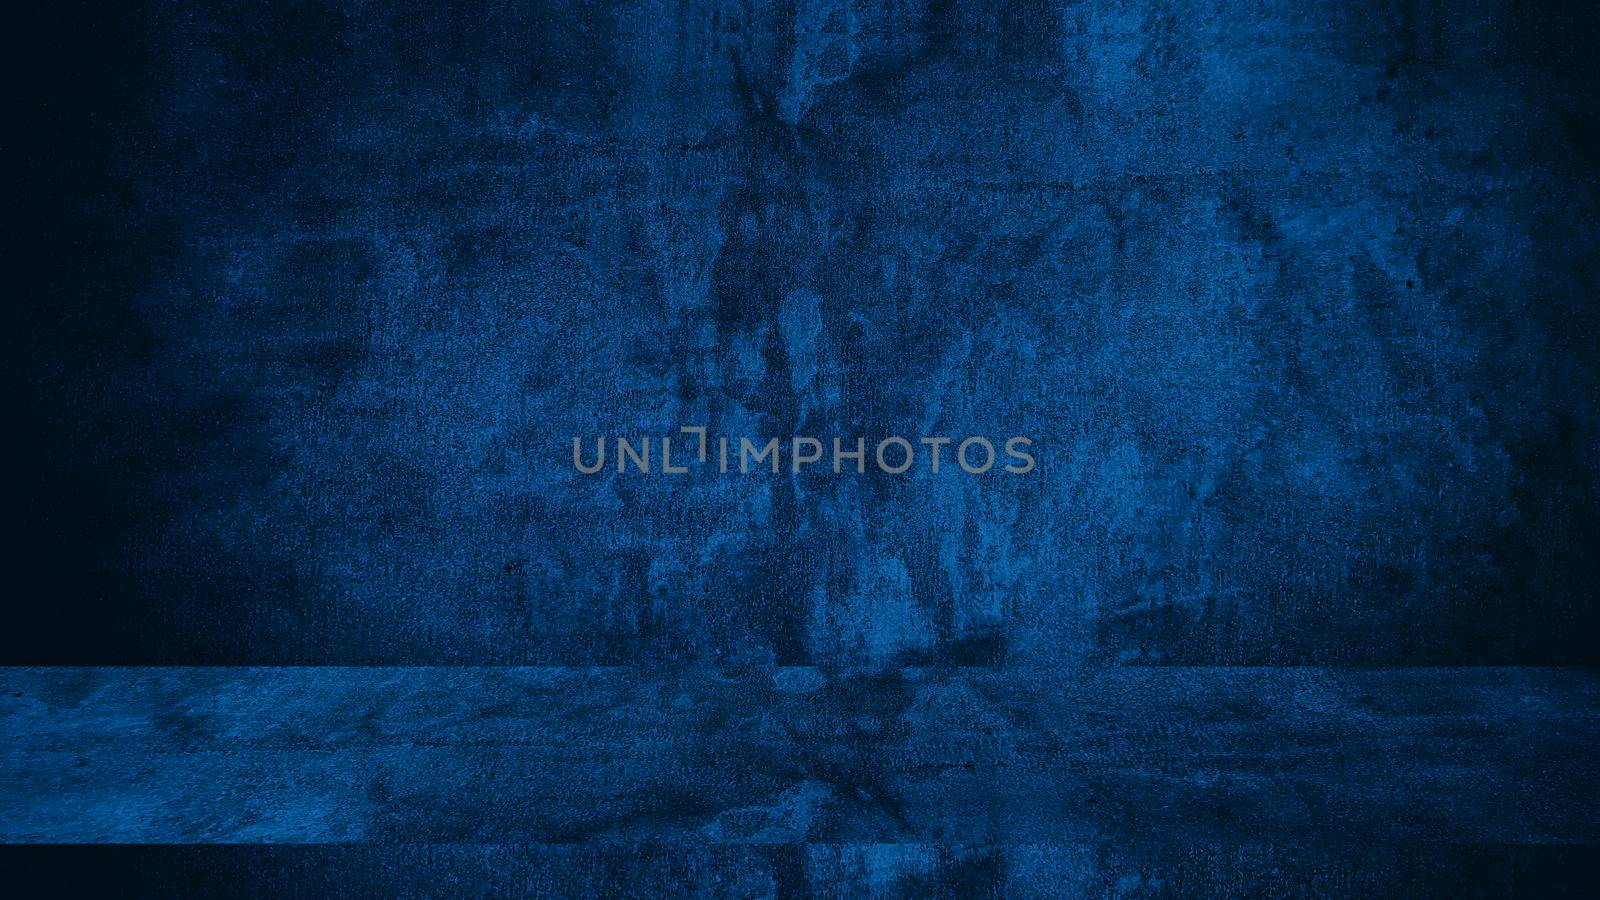 Blue designed grunge concrete texture. Vintage background with space for text or image.